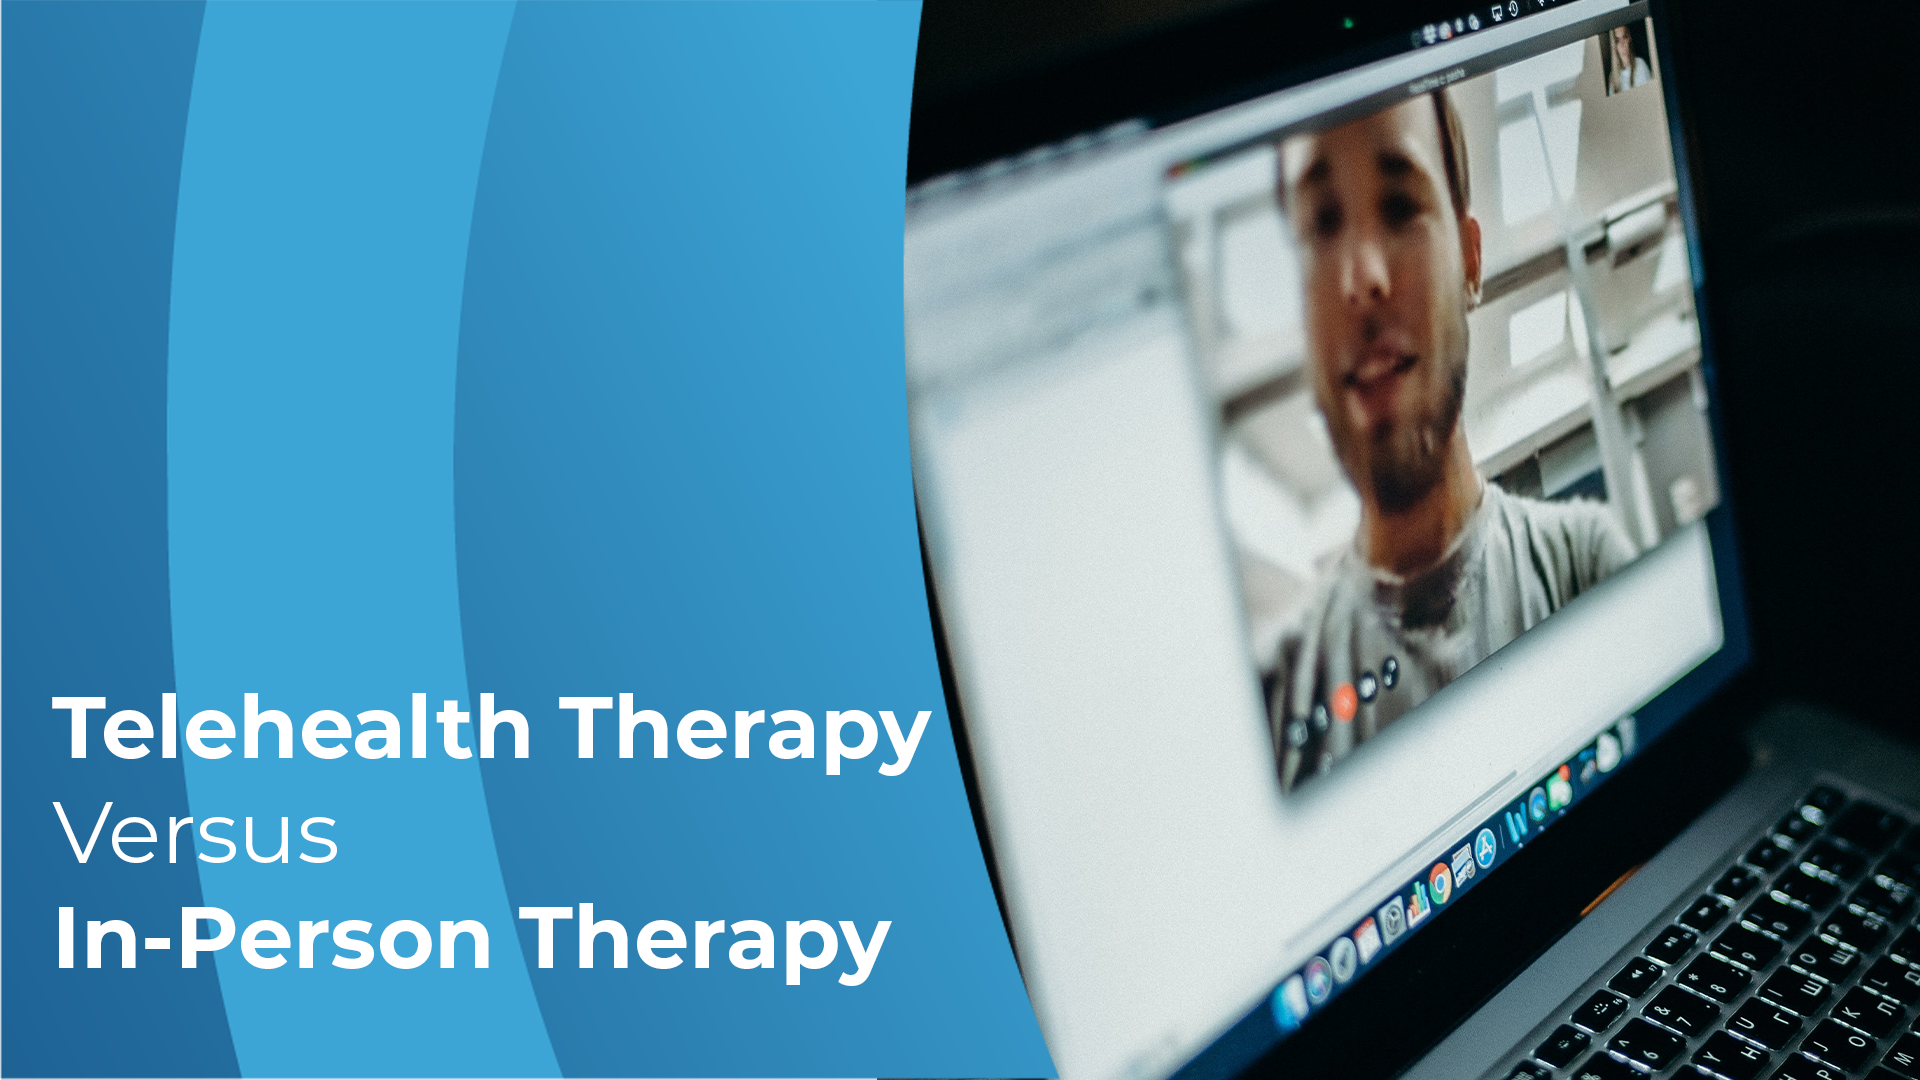 Telehealth Therapy Versus In-Person Therapy